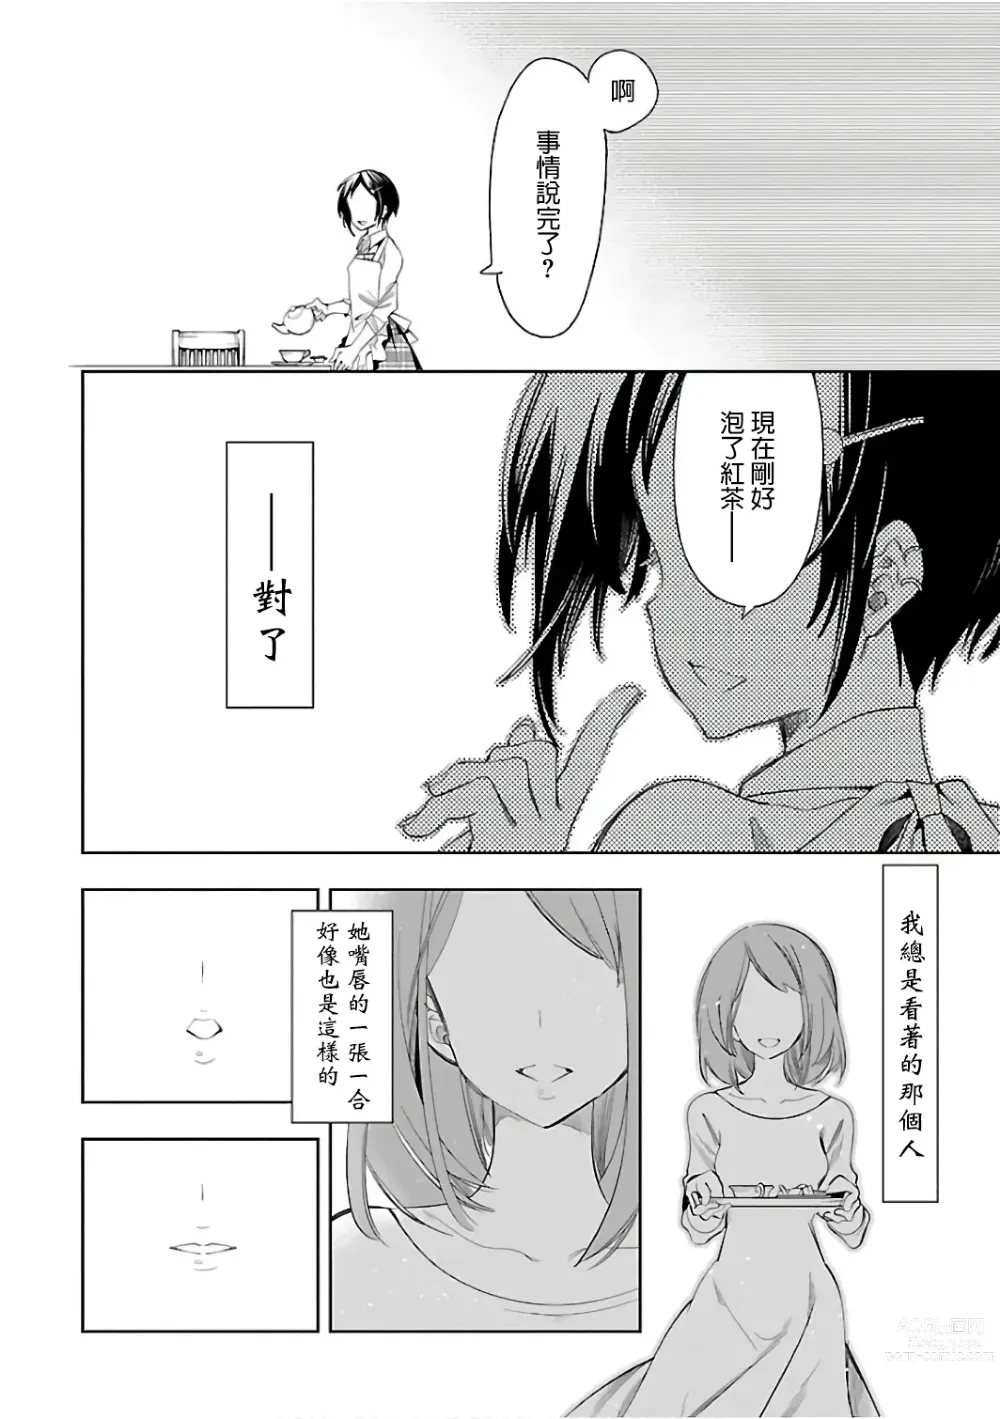 Page 1194 of doujinshi 神さまの怨結び 全1-6巻